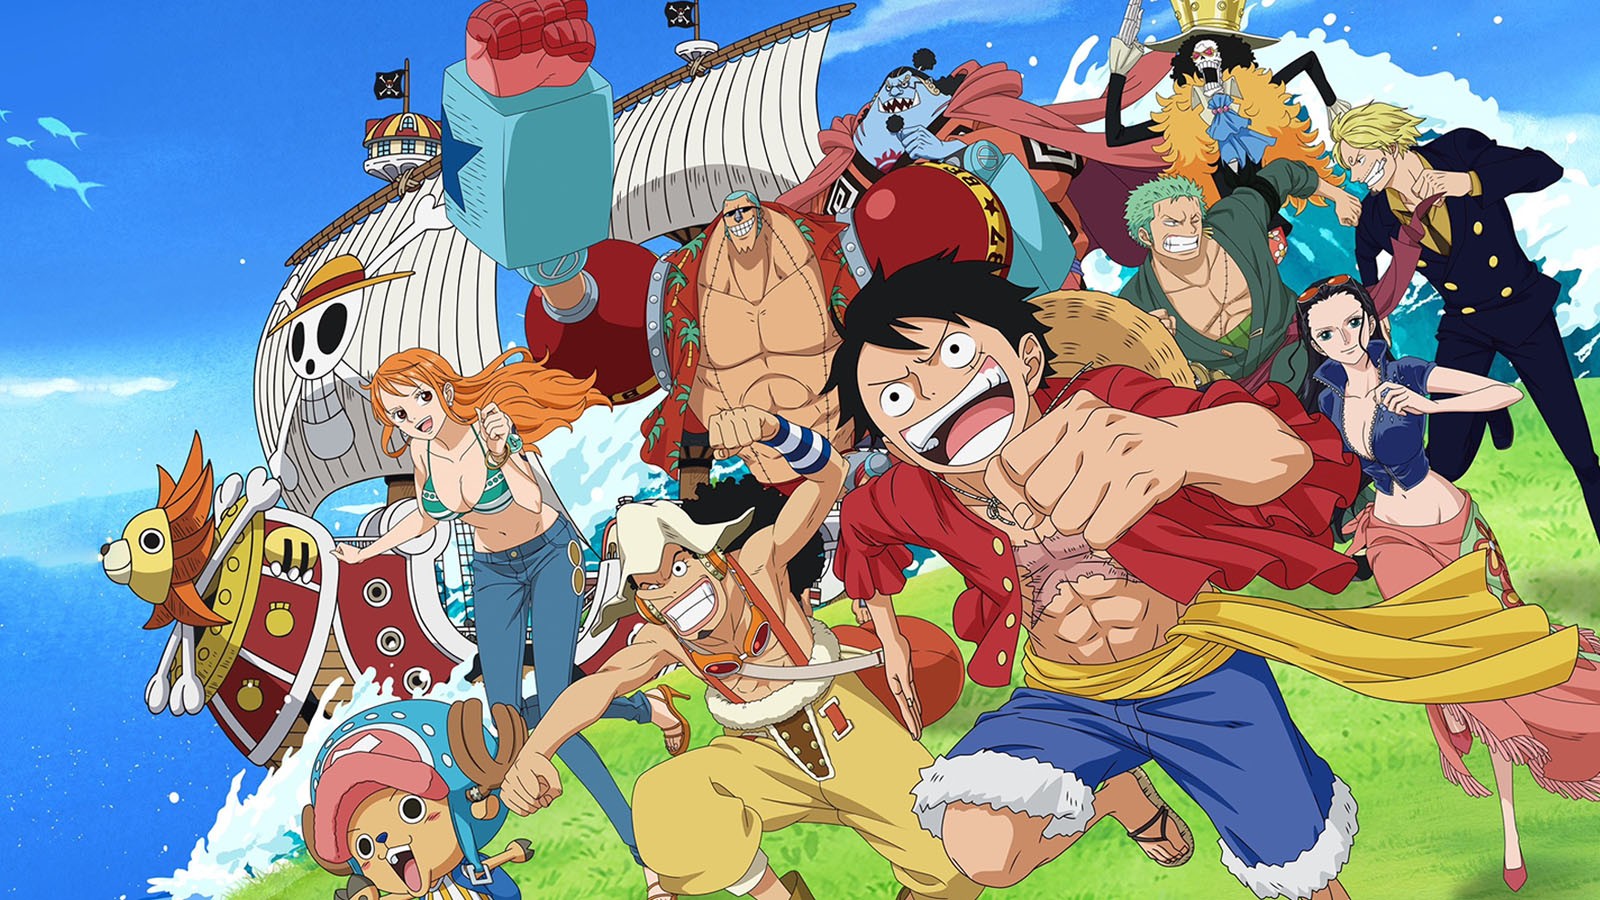 One Piece by Toei Animation